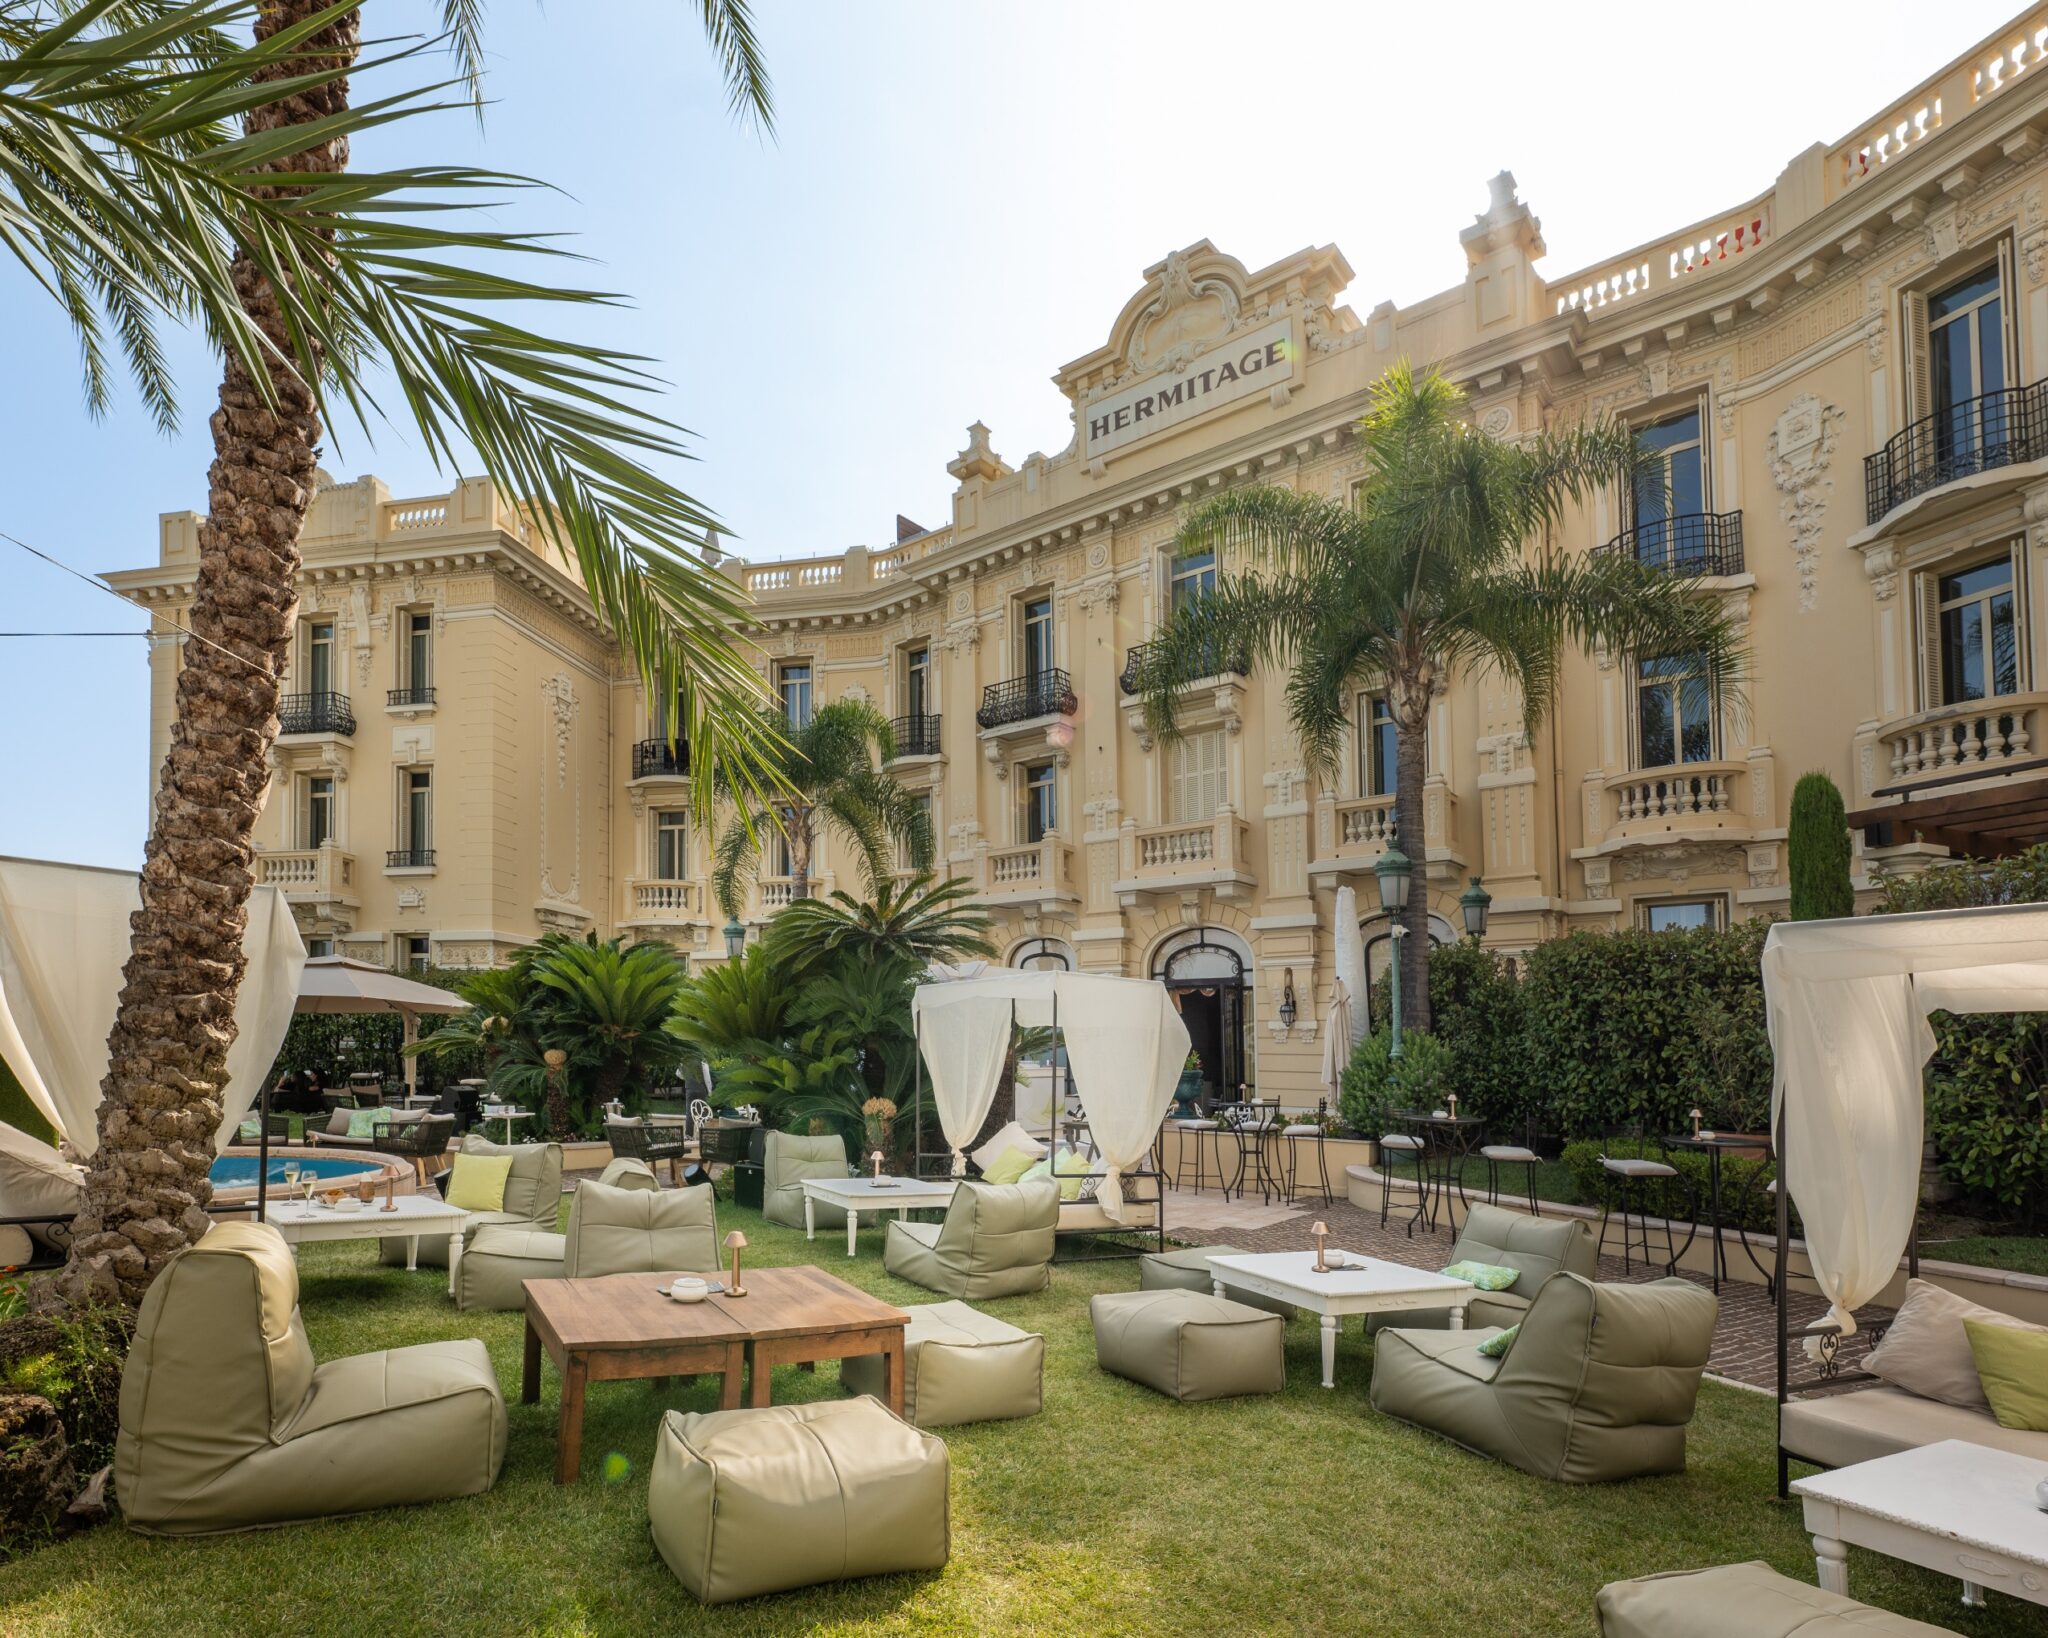 This Monaco Boutique Hotel Is Luxe, Exquisite, and Host to a Building Designed by the Same Man Who Constructed the Eiffel Tower